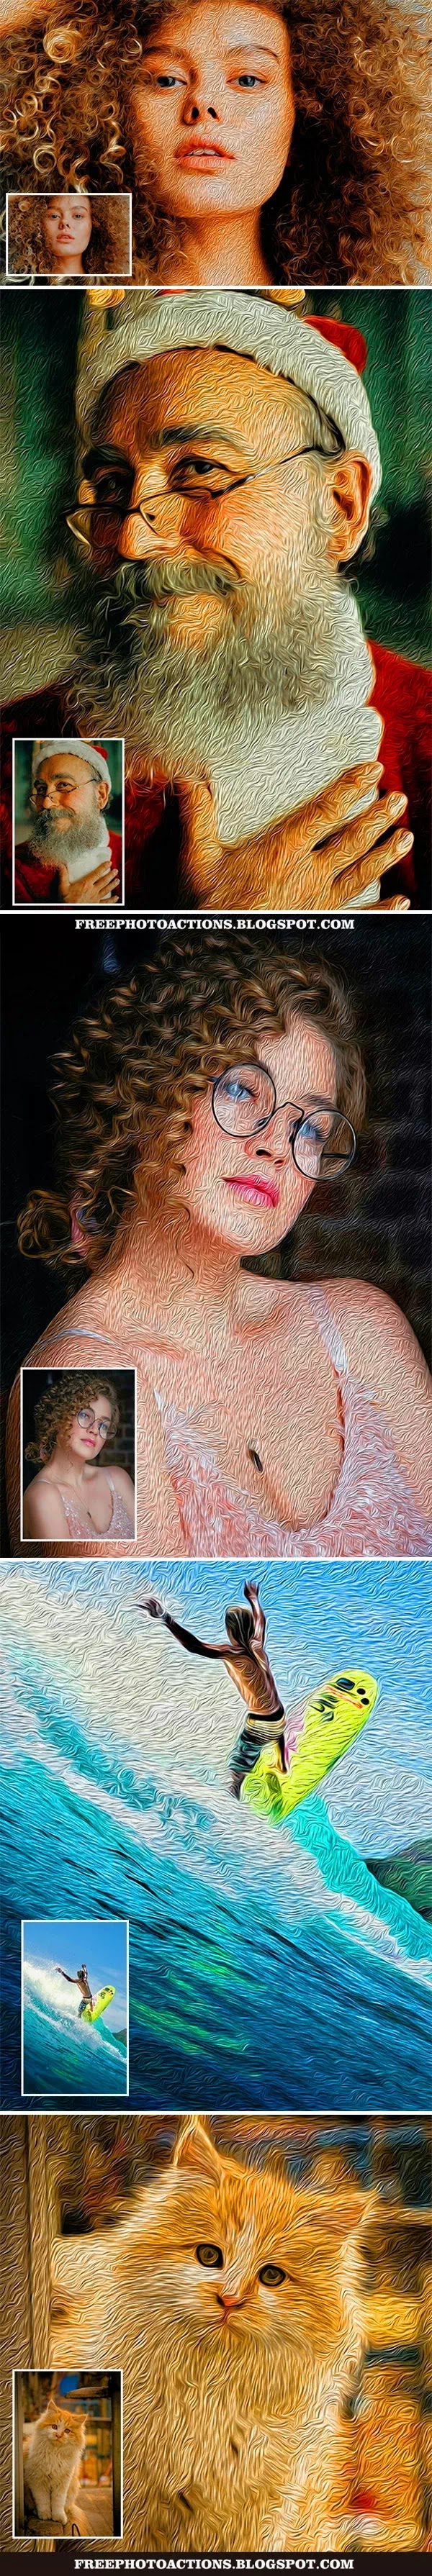 oil-painting-photoshop-action-32309443-1